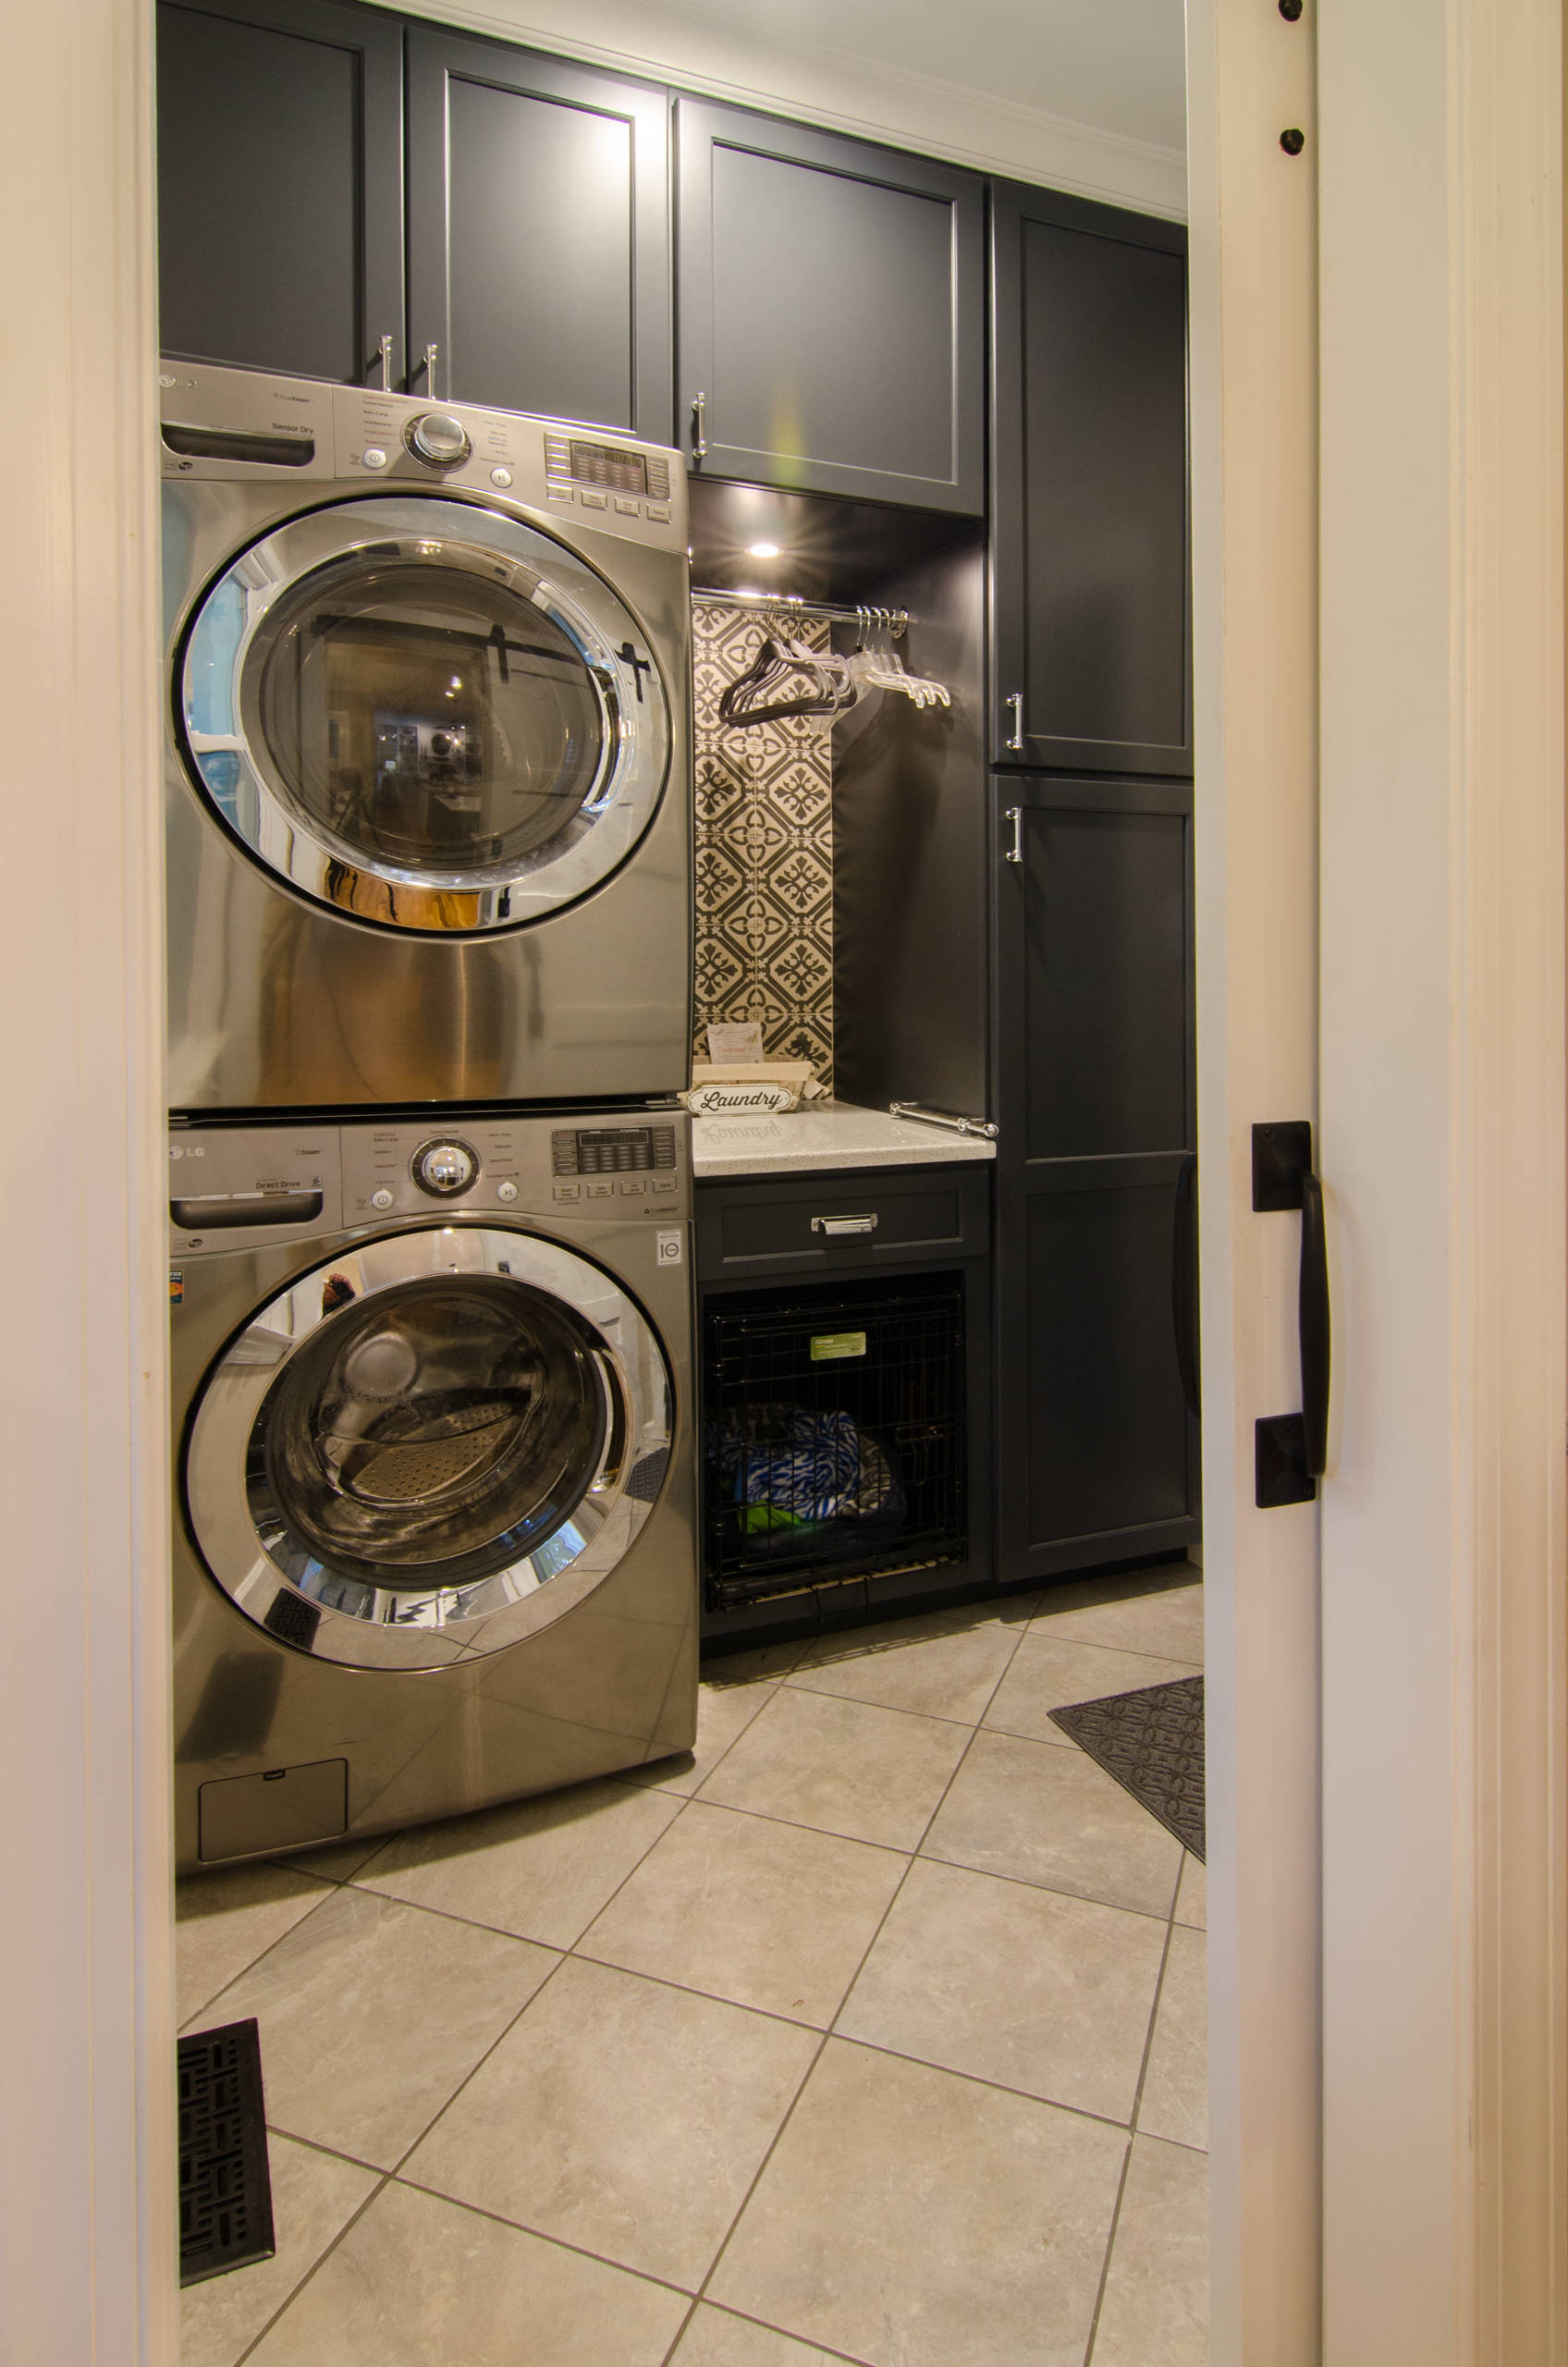 https://st.hzcdn.com/simgs/pictures/laundry-rooms/laundry-room-with-pet-sleeping-quarters-blue-ribbon-residential-construction-inc-img~df517ed60b8848de_14-5624-1-46d537a.jpg